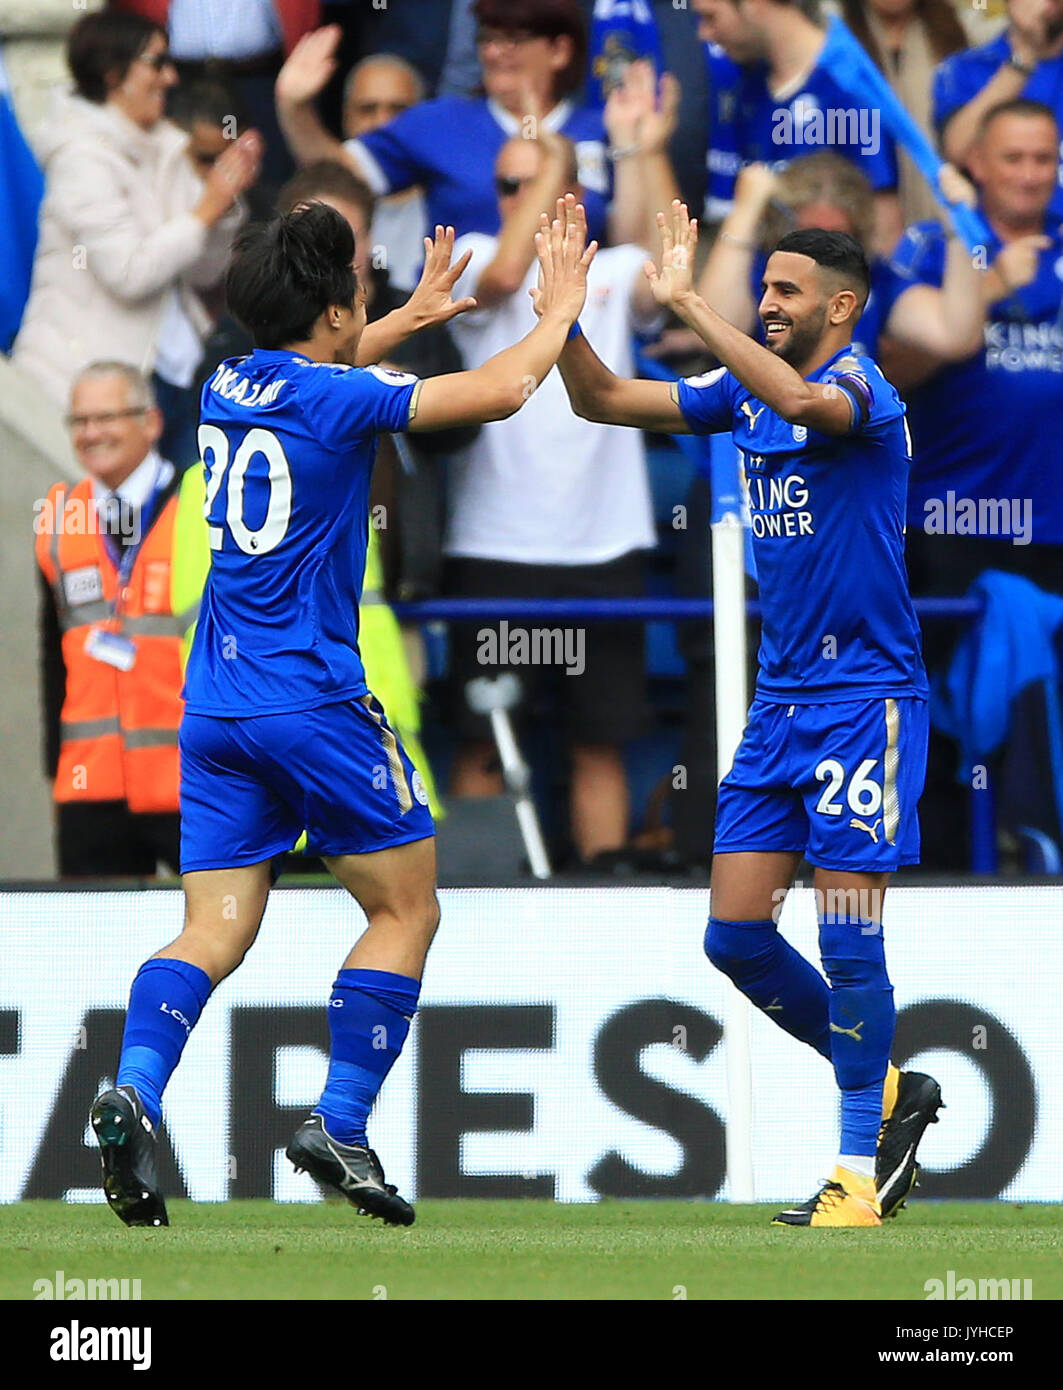 Leicester City S Shinji Okazaki Left Celebrates Scoring His Side S First Goal With Team Mate Riyad Mahrez During The Premier League Match At The King Power Stadium Leicester Stock Photo Alamy